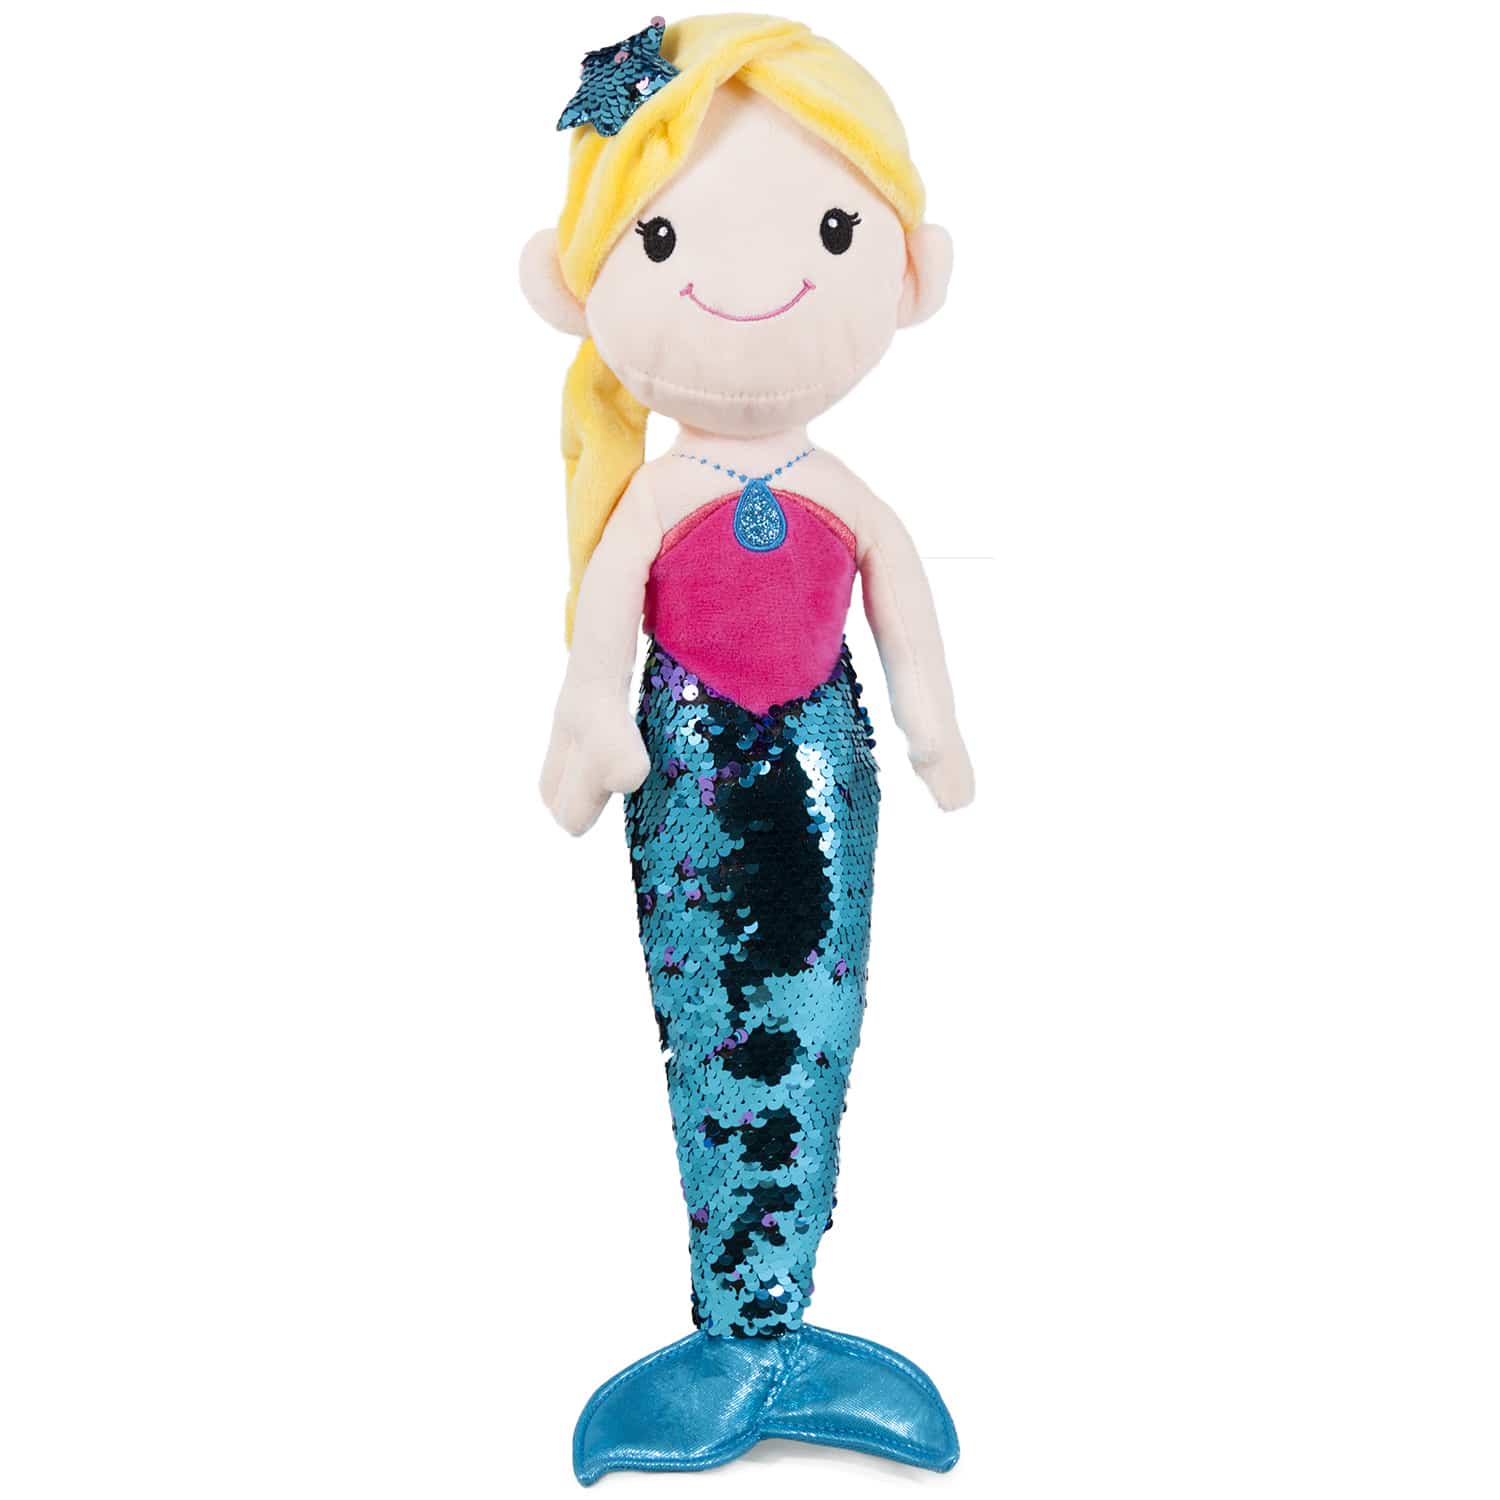 Mermaid with sequins - Blue